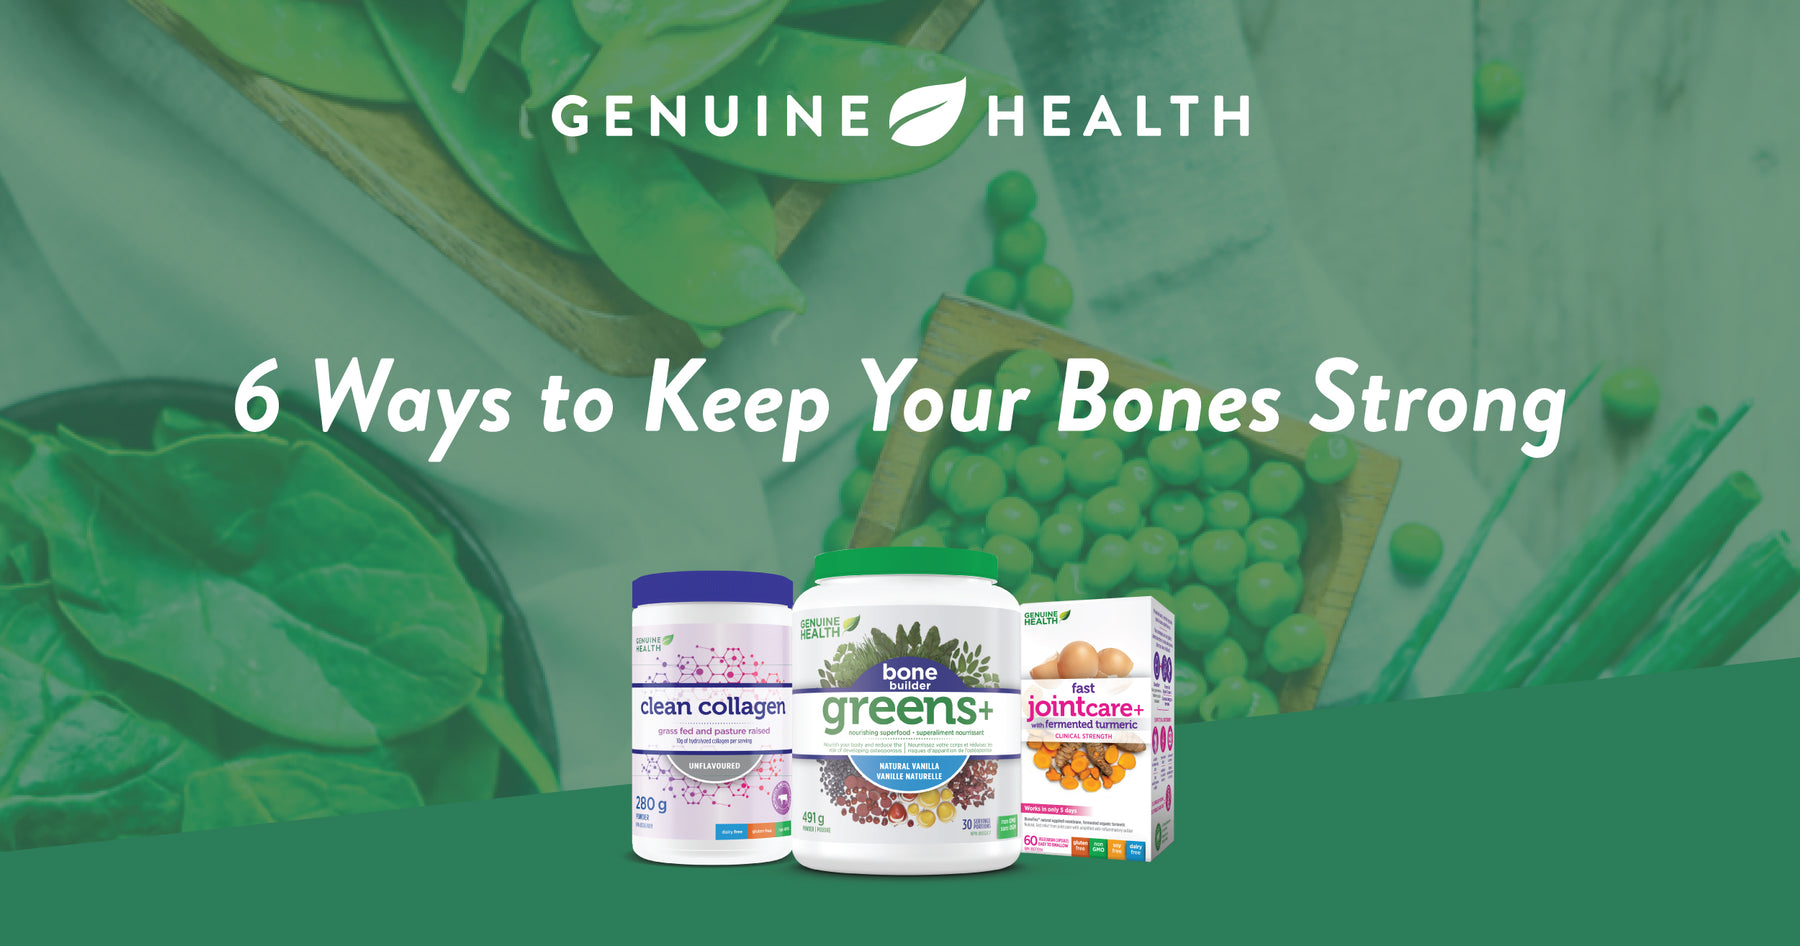 6 Ways to Keep Your Bones Strong